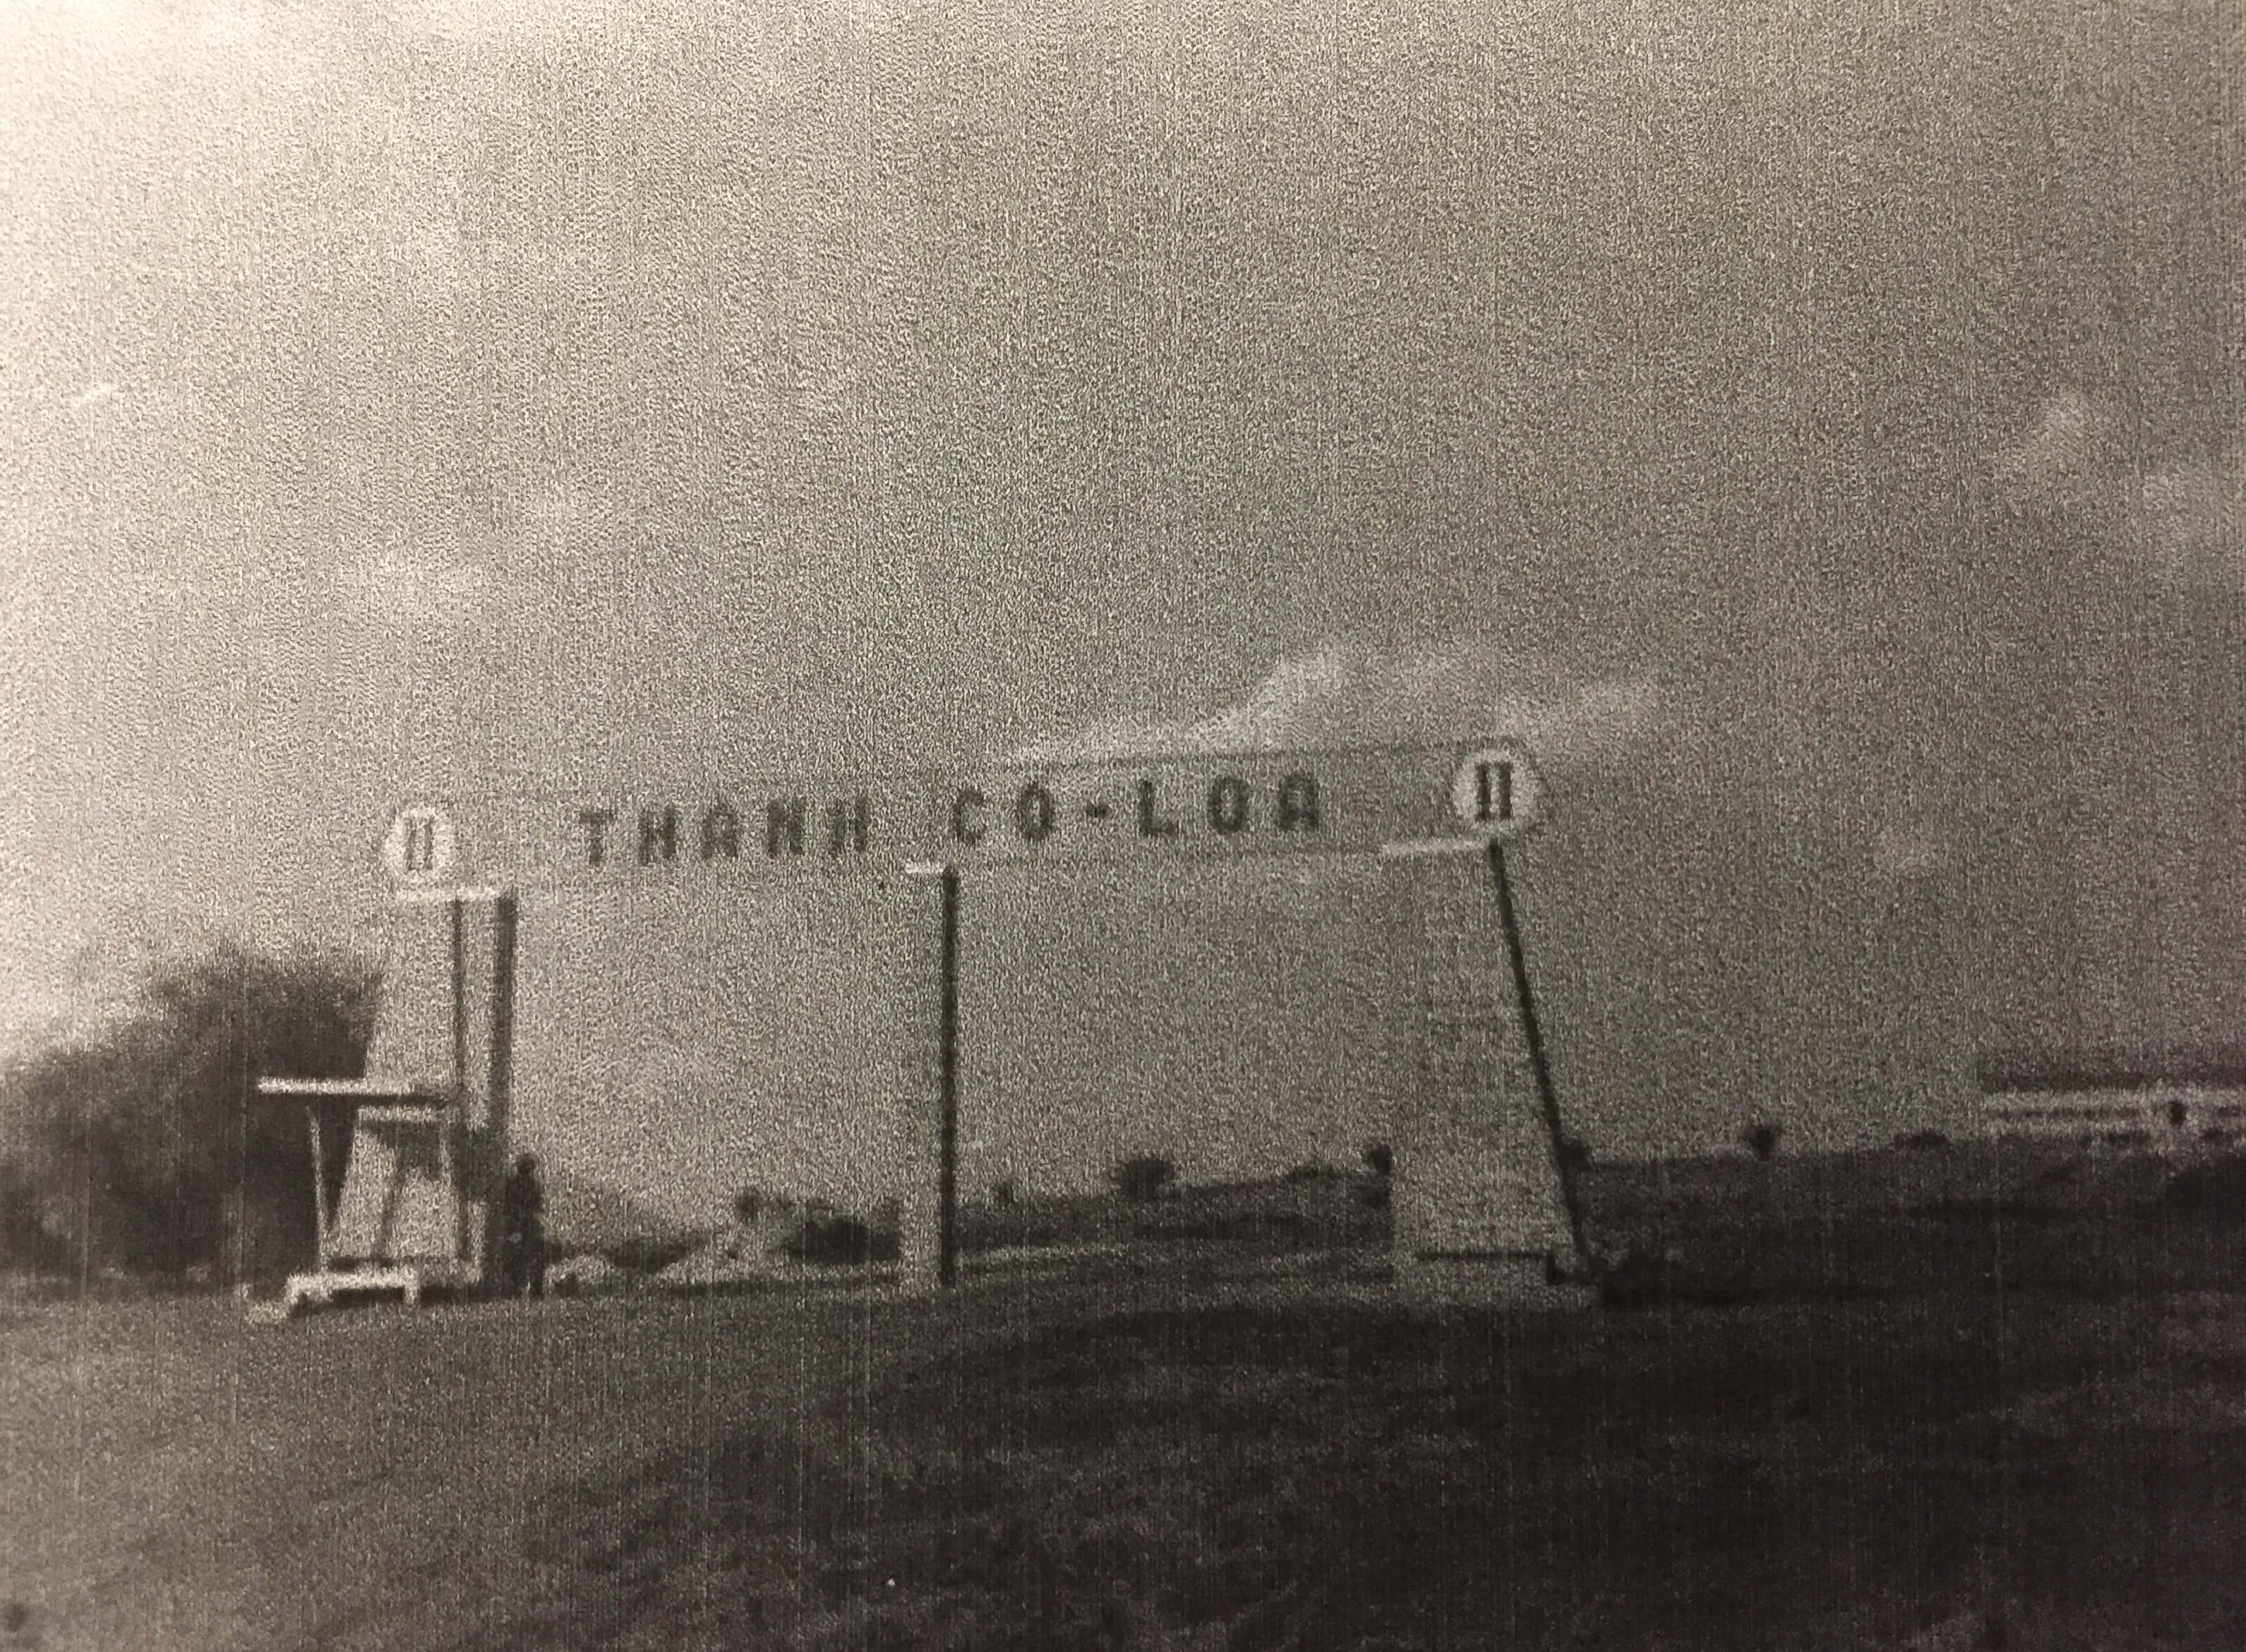 A large sign straddling a roadway, reads: "THANH CO-LOA".